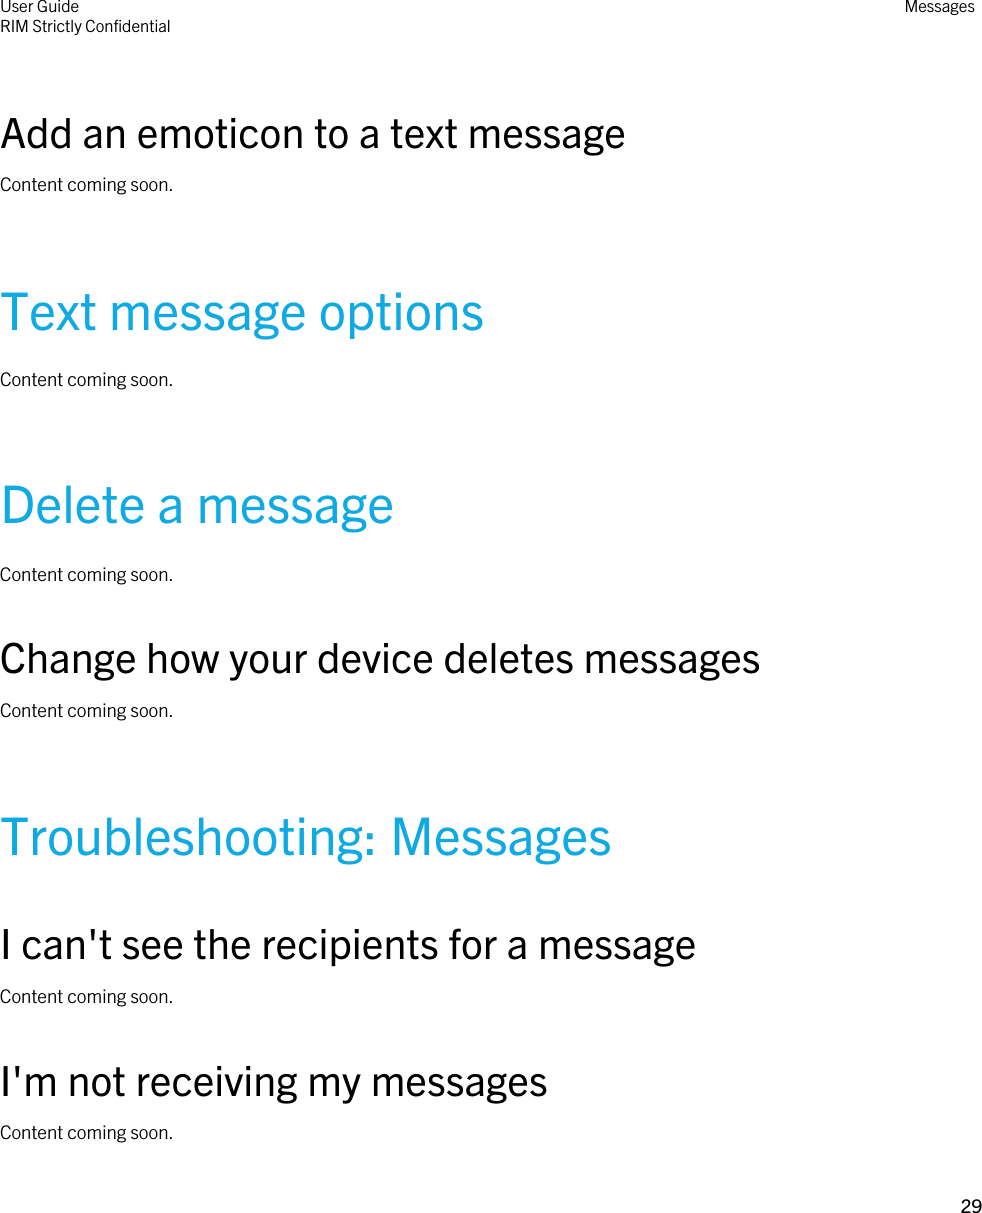 Add an emoticon to a text messageContent coming soon.Text message optionsContent coming soon.Delete a messageContent coming soon.Change how your device deletes messagesContent coming soon.Troubleshooting: MessagesI can&apos;t see the recipients for a messageContent coming soon.I&apos;m not receiving my messagesContent coming soon.User GuideRIM Strictly ConfidentialMessages29 